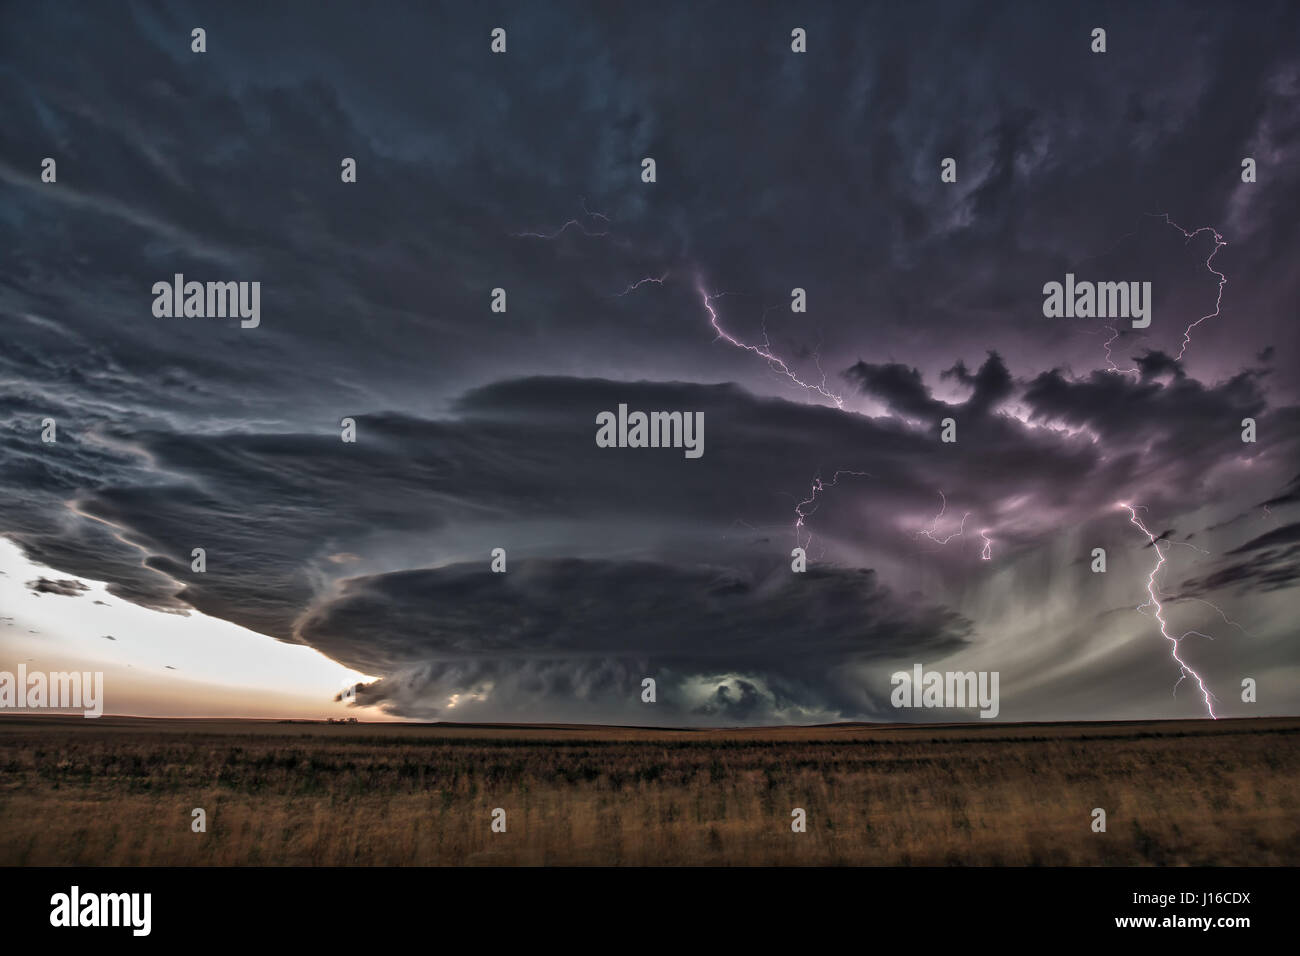 NABRASKA, USA: A TEACHER has braved death in an obsessive bid to document the birth and death of nature’s dramatic supercell storms. With the atmosphere crackling with tension, pictures show how this storm came alive with deadly explosions of lightning before this brave amateur stormchaser was able to make his escape and capture the calm blue sky and sunrays emerging from behind the once-angry clouds. The pictures were taken in the great plains of America’s Midwest by high-school chemistry teacher Mark Rosengarten (48) who has dedicated a decade of his life to chasing and documenting dramatic  Stock Photo